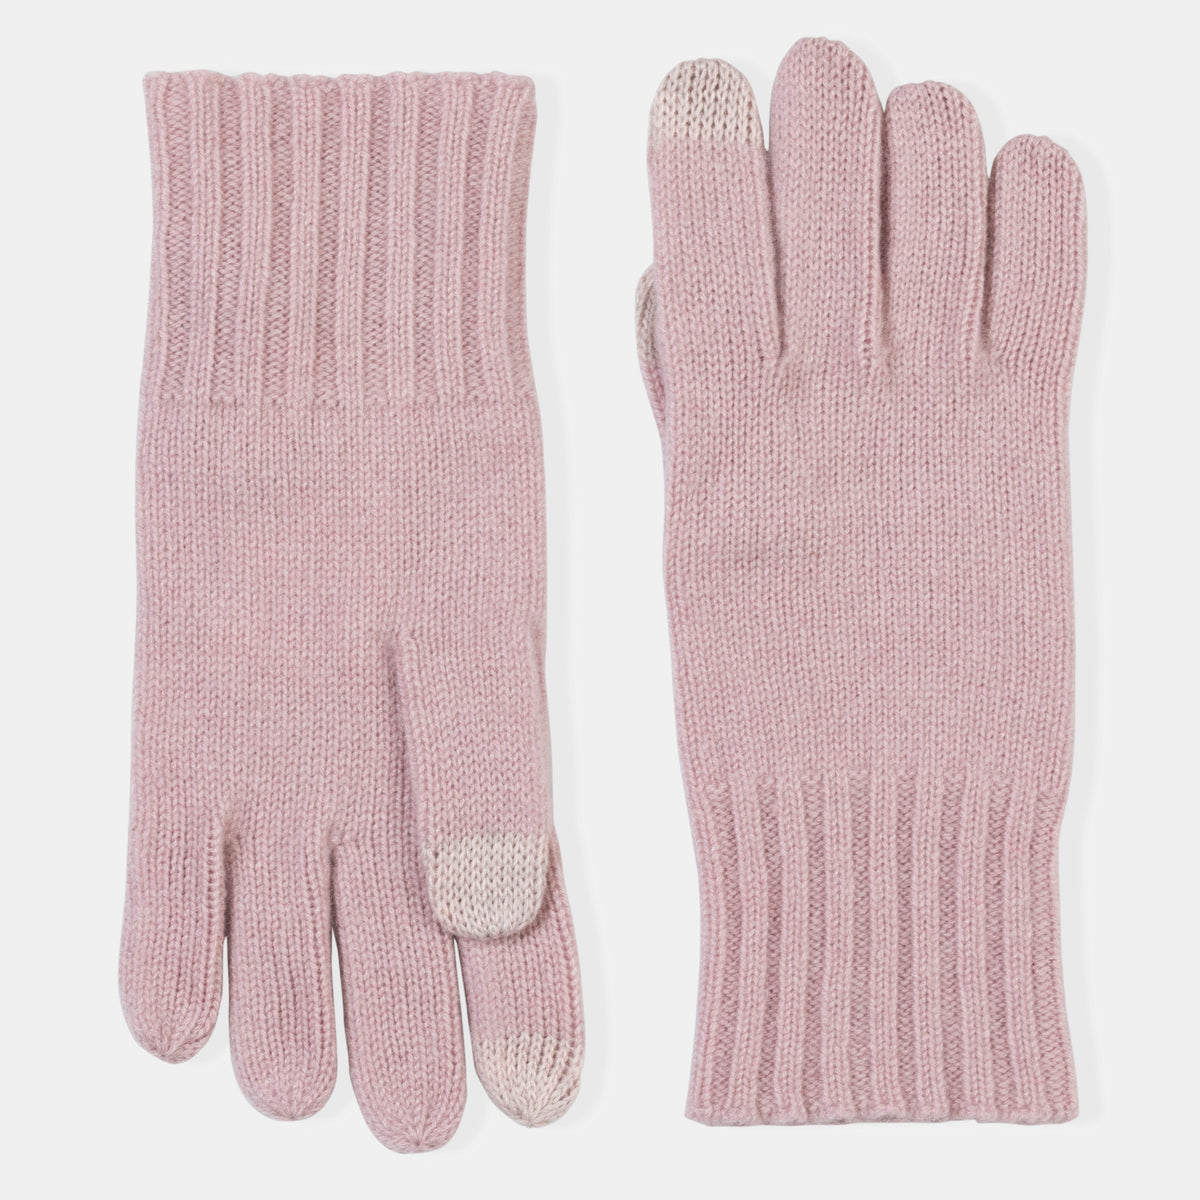 Picture of knit cashmere gloves with touch tech finger tips and rib cuff, dusty rose.